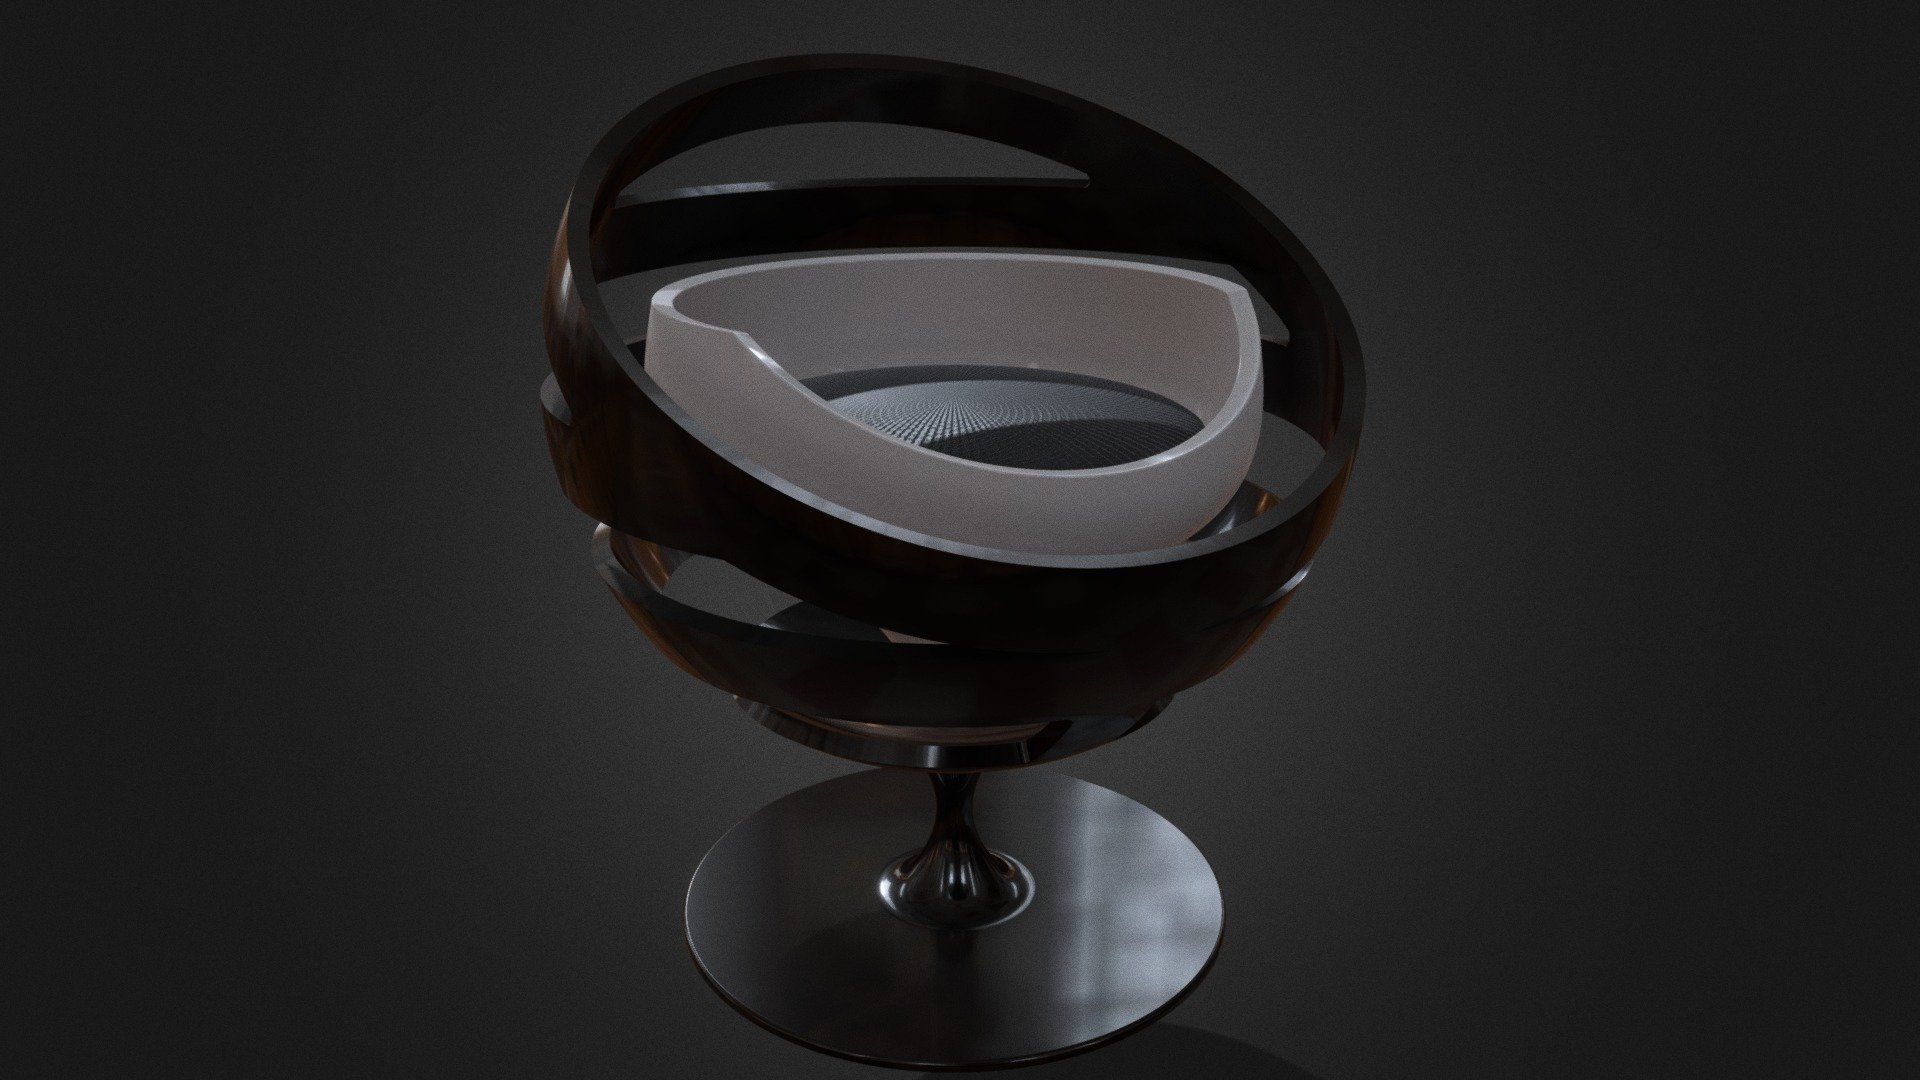 Round sphere chair ⚫
Perfect for interior design project.

Found this concept on the web!
Modeled in Rhinoceros 7 3d model